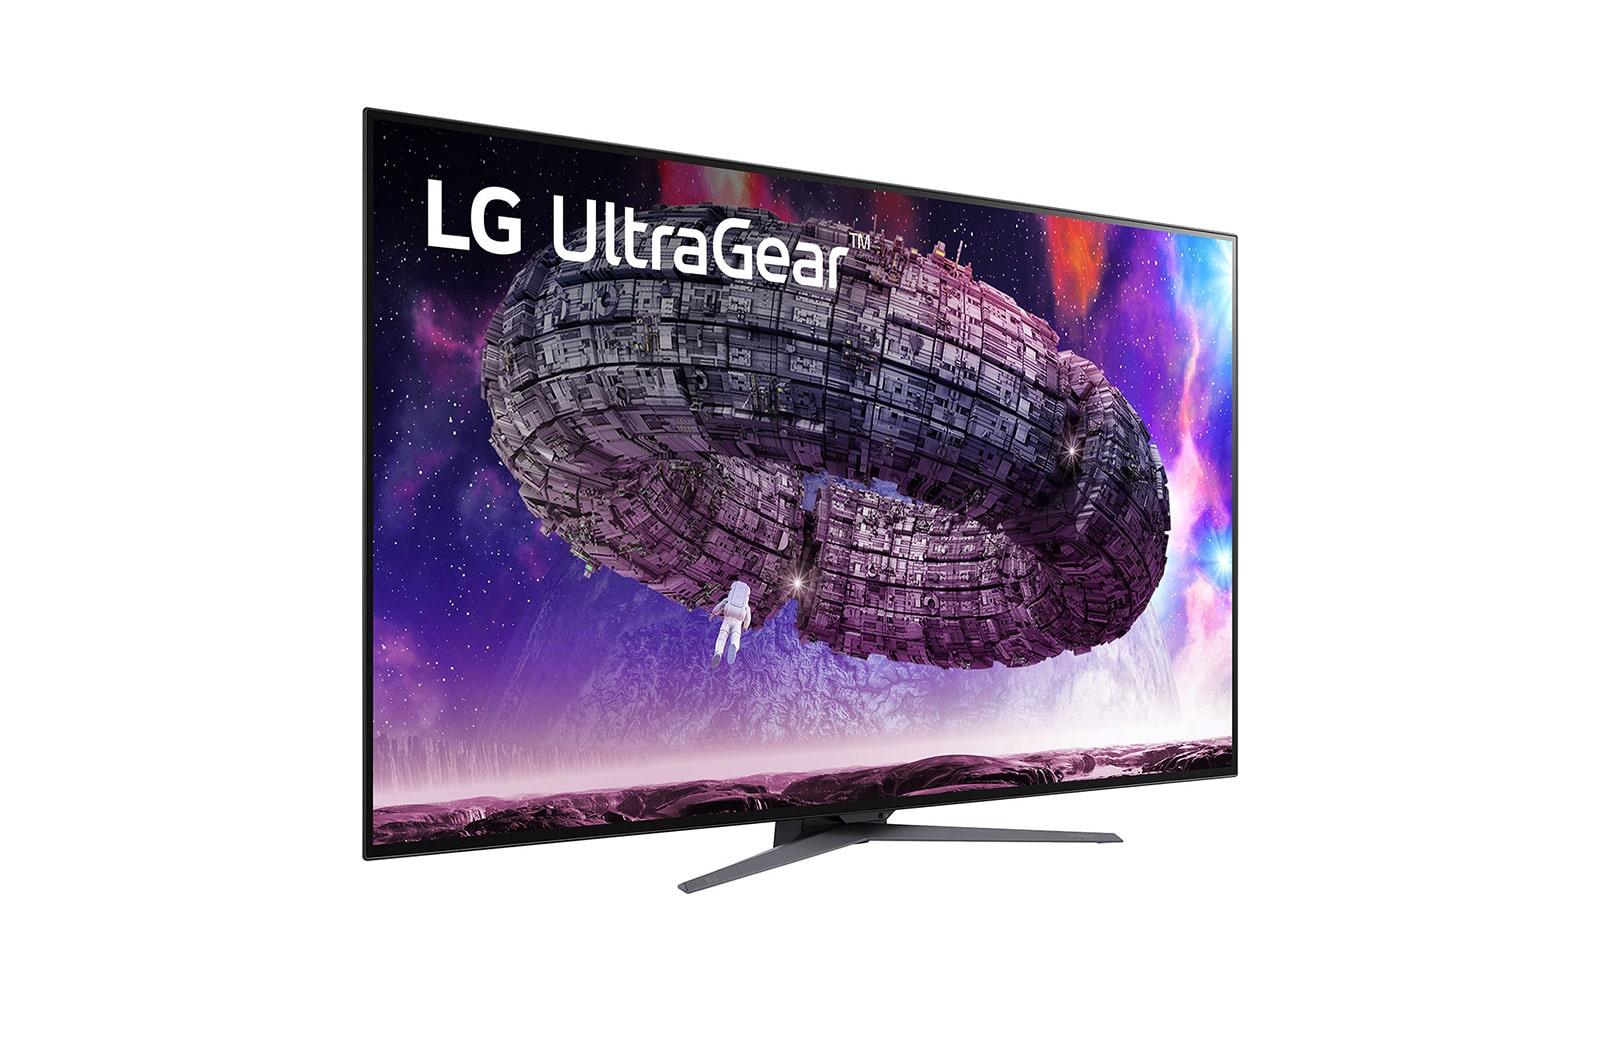 LG 48GQ900-B 48'' UltraGear™ UHD 4K (3840 x 2160) OLED Monitor with Anti-Glare Low Reflection 0.1ms R/T 120Hz and G-SYNC® Compatible